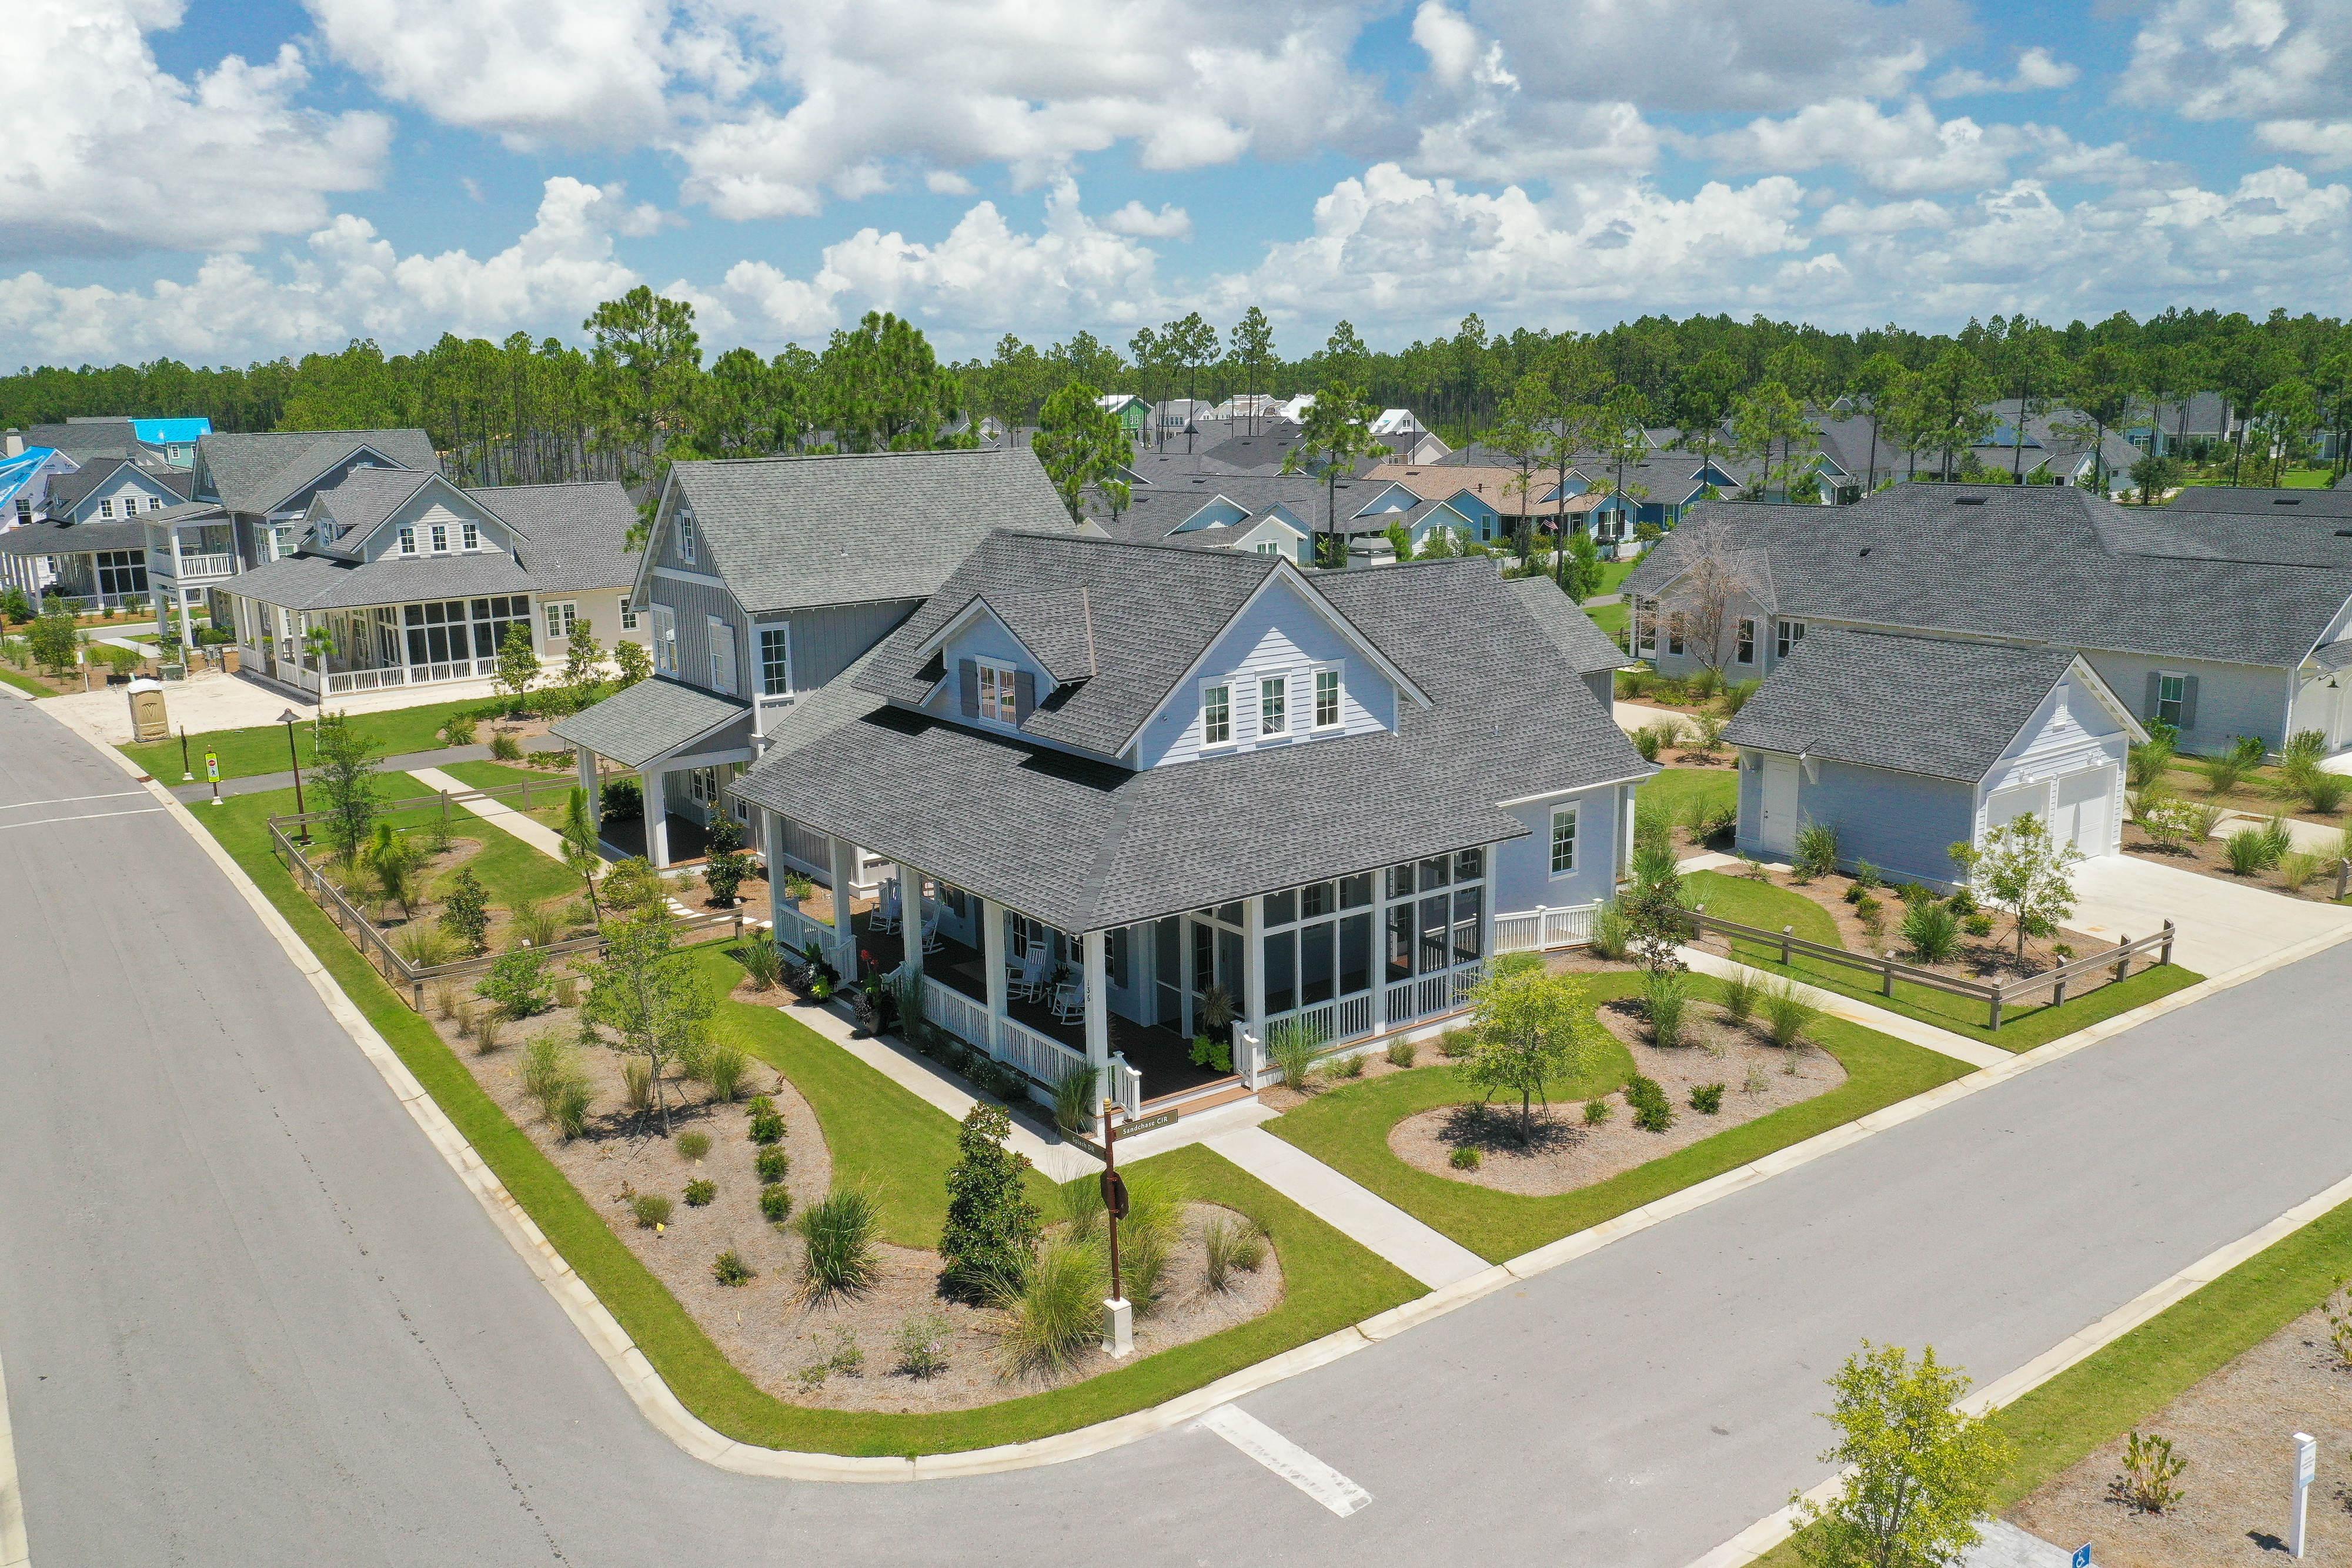 An aerial view of some of the homes at Watersound Origins